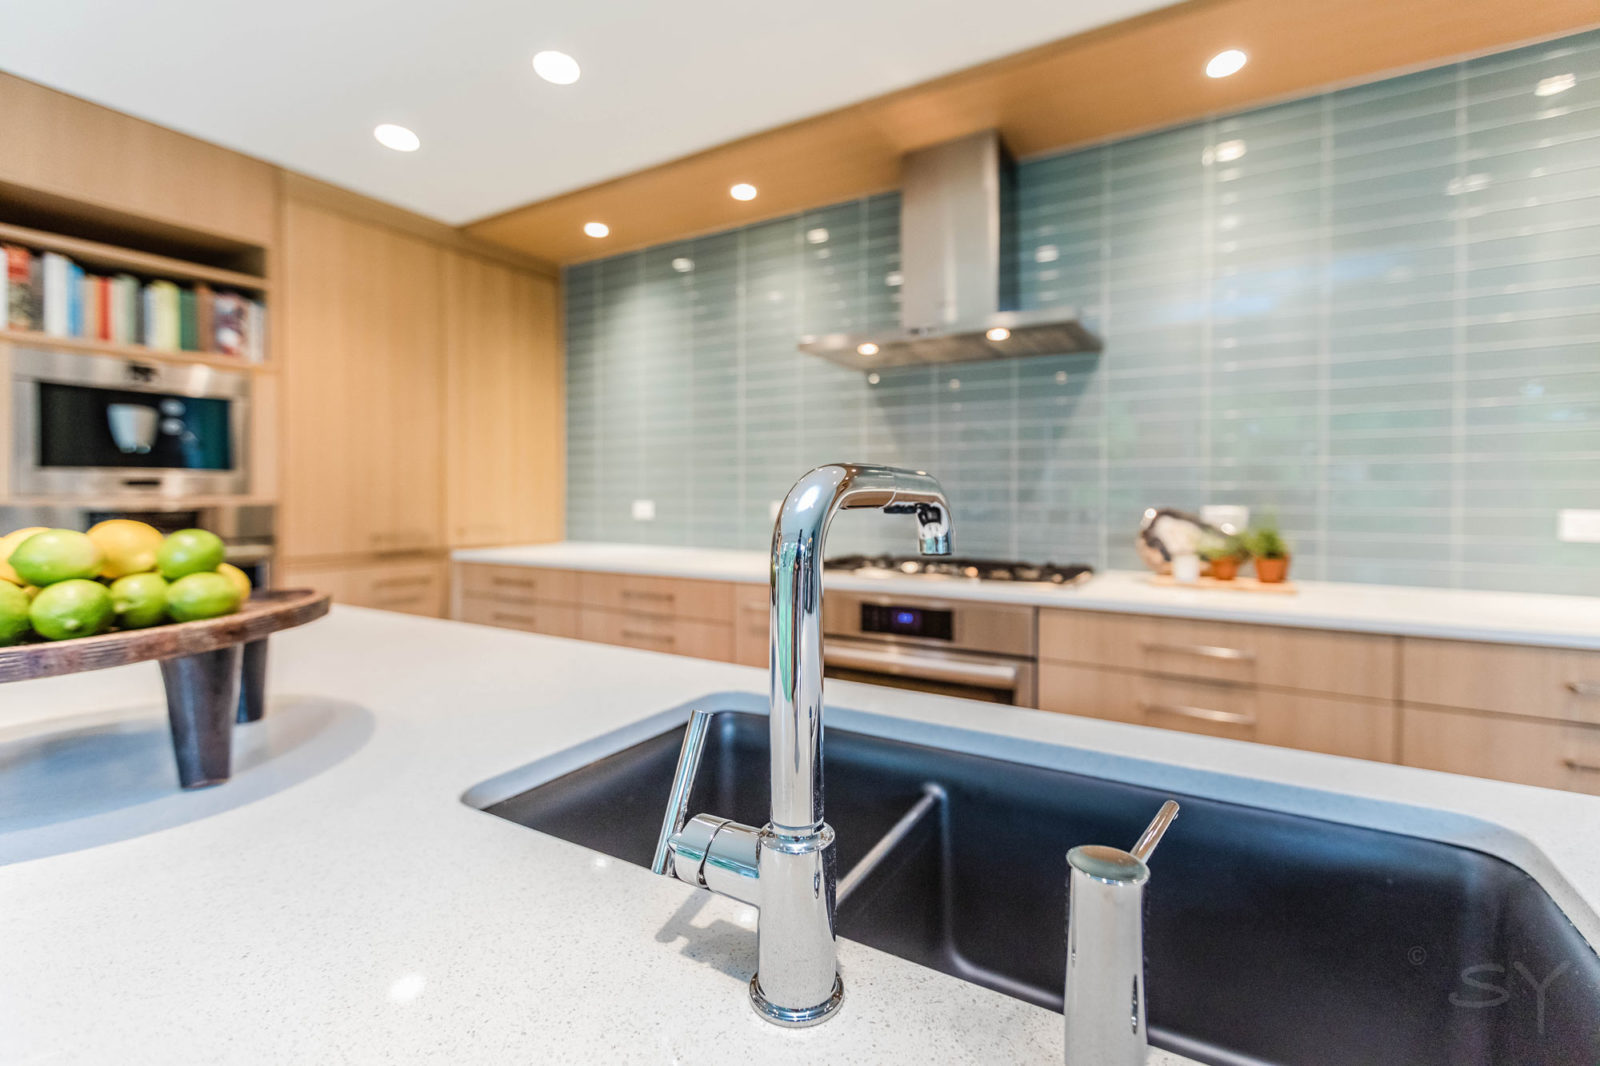 Close-up of stainless steel faucet in updated Brigham kitchen with simplistic light wood cabinets & green/blue subway-tiled backsplash